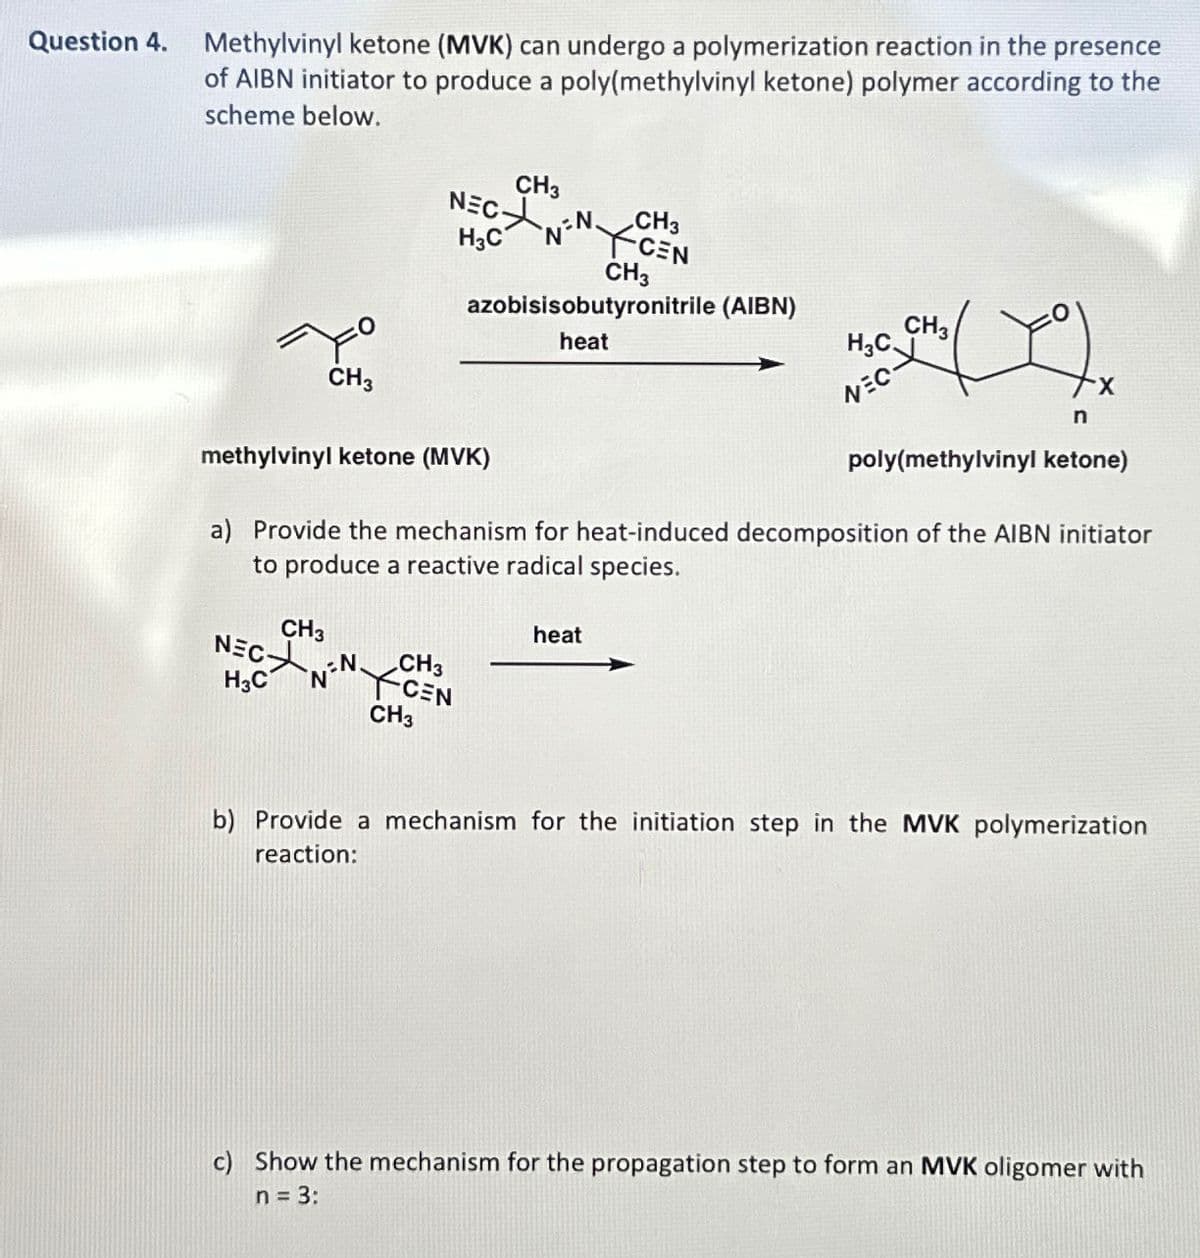 Question 4.
Methylvinyl ketone (MVK) can undergo a polymerization reaction in the presence
of AIBN initiator to produce a poly(methylvinyl ketone) polymer according to the
scheme below.
NEC
H3C
CH3
N=N
CH3
CEN
CH3
azobisisobutyronitrile (AIBN)
CH3
methylvinyl ketone (MVK)
heat
H3C
CH3
NEC
X
n
poly(methylvinyl ketone)
a) Provide the mechanism for heat-induced decomposition of the AIBN initiator
to produce a reactive radical species.
H3C
CH3
N.
NCEN
CH3
CH3
heat
b) Provide a mechanism for the initiation step in the MVK polymerization
reaction:
c) Show the mechanism for the propagation step to form an MVK oligomer with
n = 3: